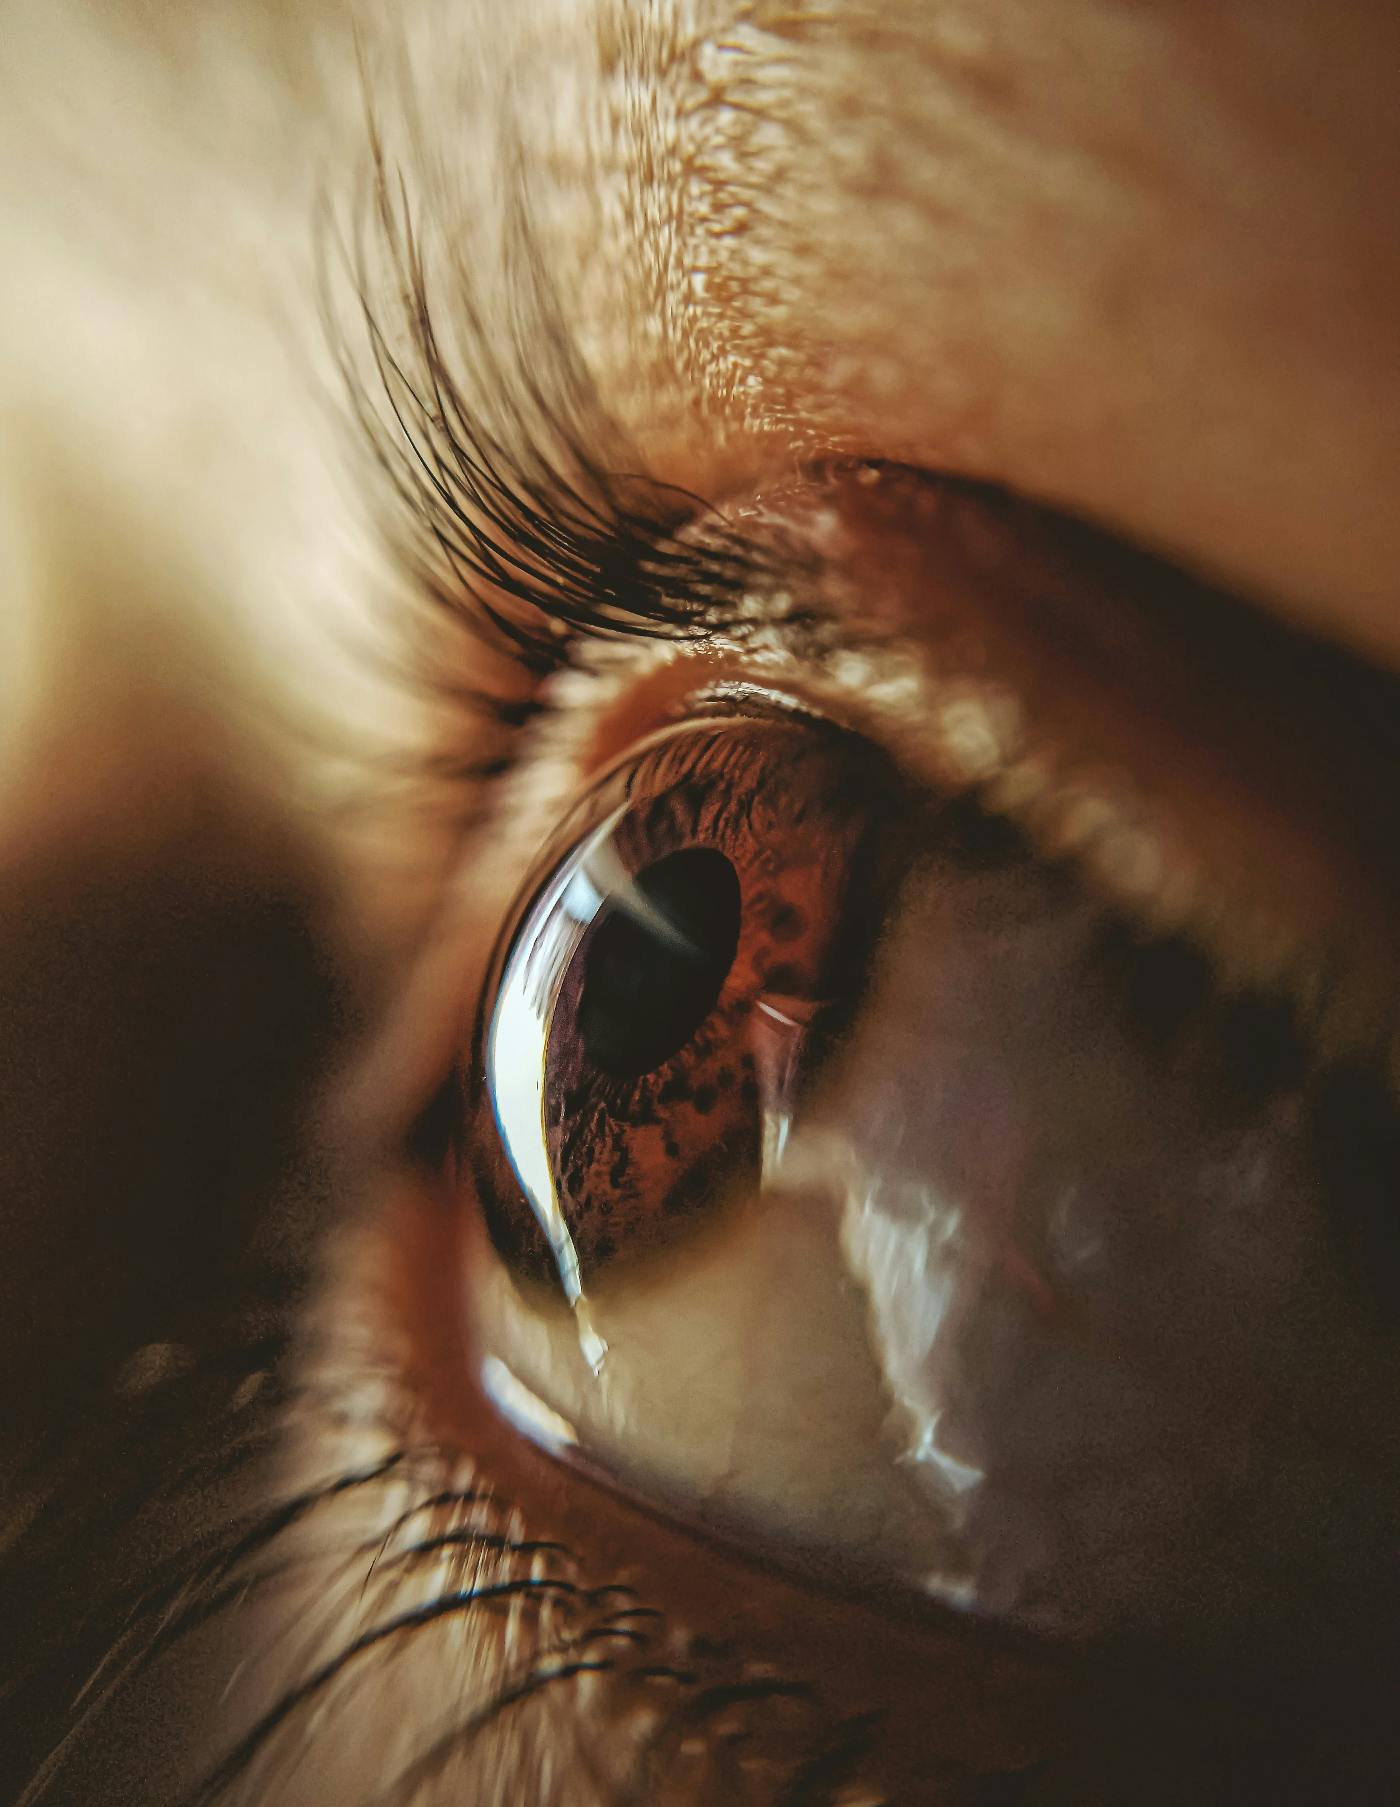 An extreme close up of a woman's eye